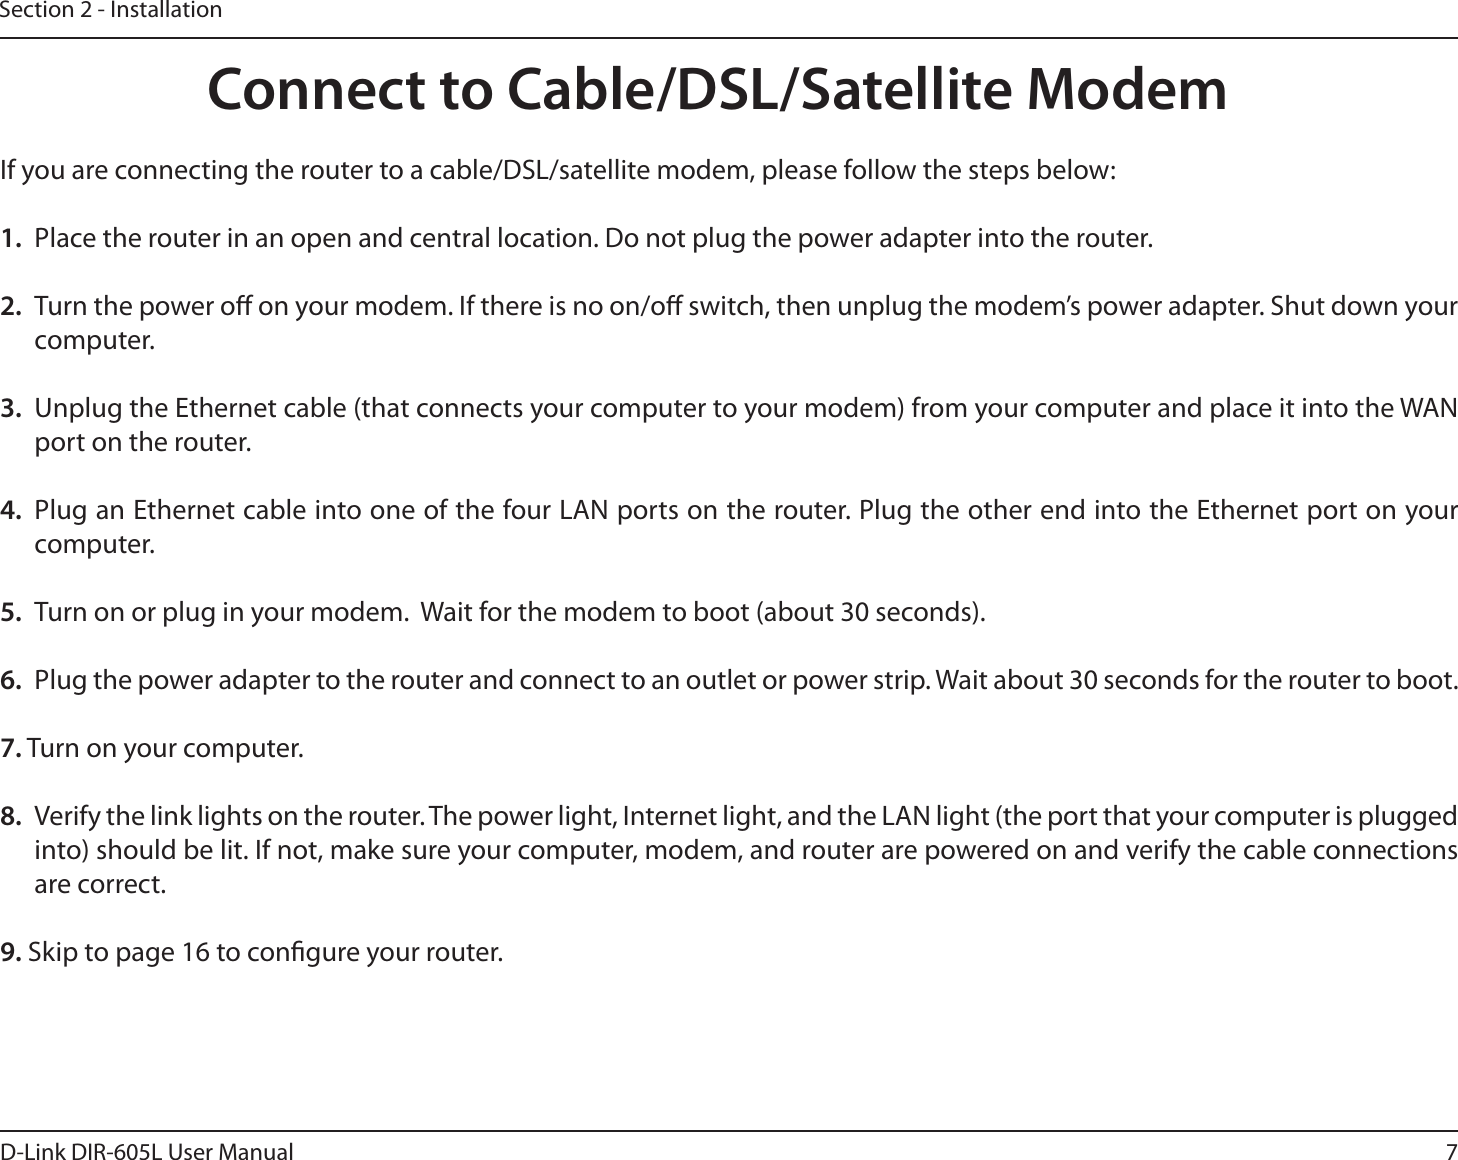 7D-Link DIR-605L User ManualSection 2 - InstallationIf you are connecting the router to a cable/DSL/satellite modem, please follow the steps below:1.  Place the router in an open and central location. Do not plug the power adapter into the router. 2.  Turn the power o on your modem. If there is no on/o switch, then unplug the modem’s power adapter. Shut down your computer.3.  Unplug the Ethernet cable (that connects your computer to your modem) from your computer and place it into the WAN port on the router.  4.  Plug an Ethernet cable into one of the four LAN ports on the router. Plug the other end into the Ethernet port on your computer.5.  Turn on or plug in your modem.  Wait for the modem to boot (about 30 seconds). 6.  Plug the power adapter to the router and connect to an outlet or power strip. Wait about 30 seconds for the router to boot. 7. Turn on your computer. 8.  Verify the link lights on the router. The power light, Internet light, and the LAN light (the port that your computer is plugged into) should be lit. If not, make sure your computer, modem, and router are powered on and verify the cable connections are correct. 9. Skip to page 16 to congure your router. Connect to Cable/DSL/Satellite Modem